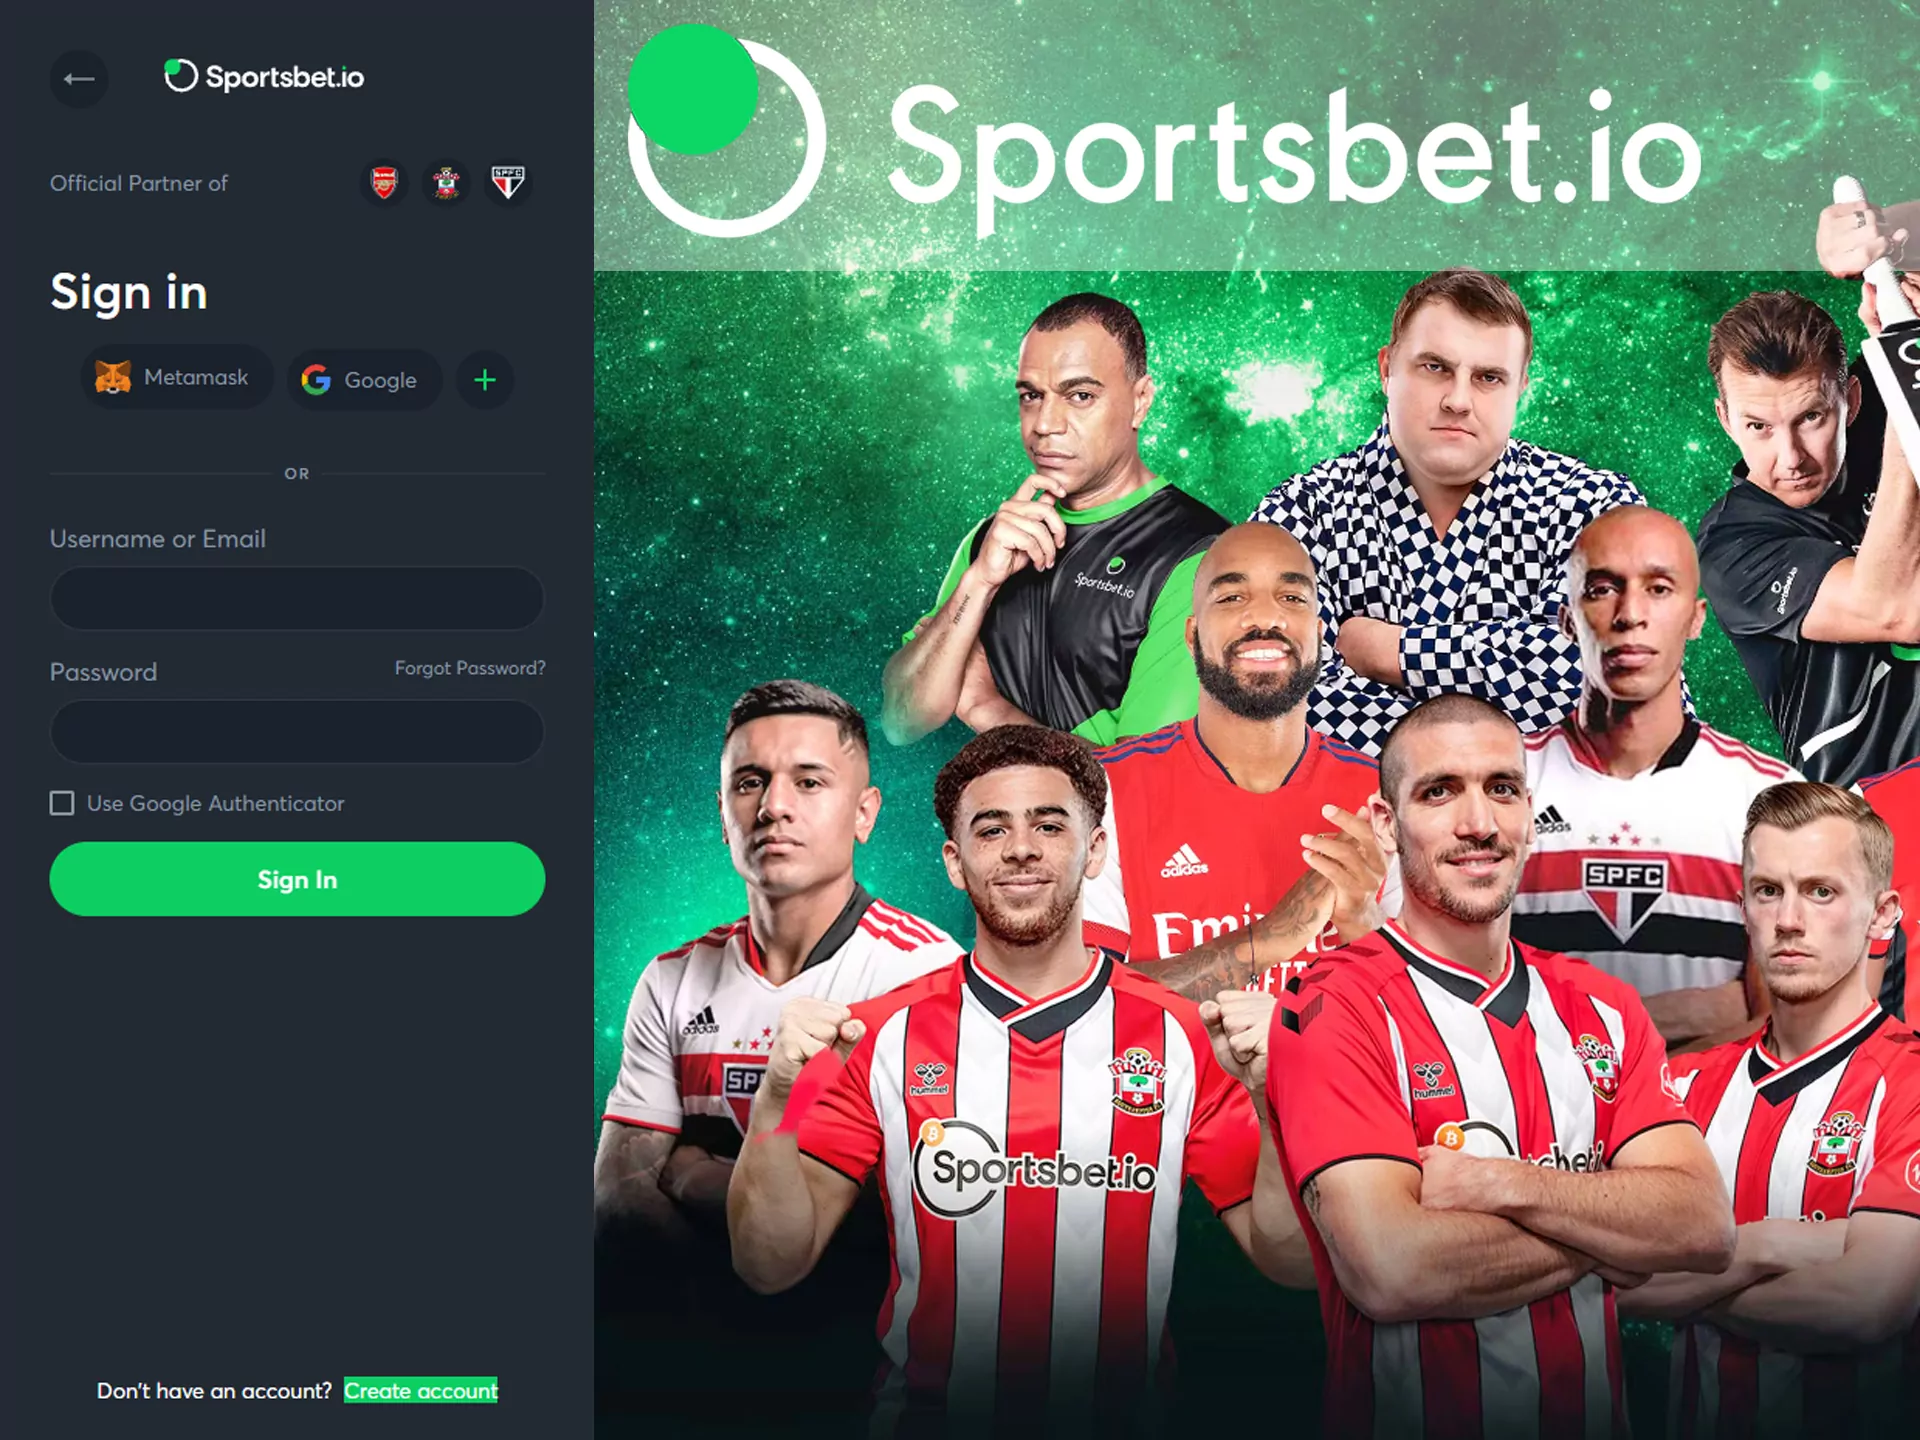 Use your account info to log on to Sportsbet.